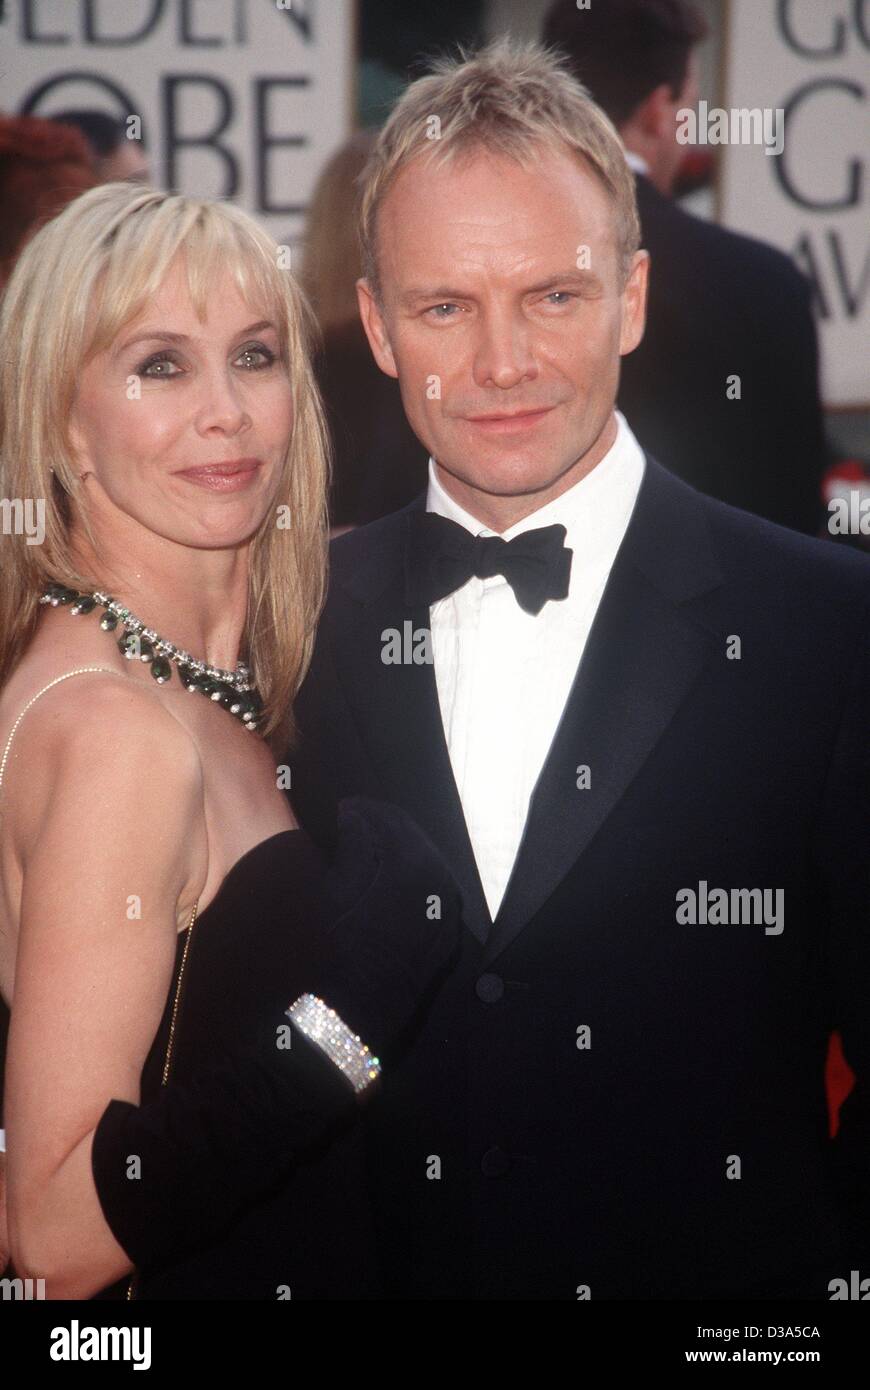 (dpa files) - British rock musician Sting and his wife Trudie Styler arrive at the 58th Golden Globes in Beverly Hills, 21 January 2001. Sting was nominated for his song 'My Funny Friend And Me' in 'The Emperor's New Groove' for Best Original Song, but did not win. Stock Photo